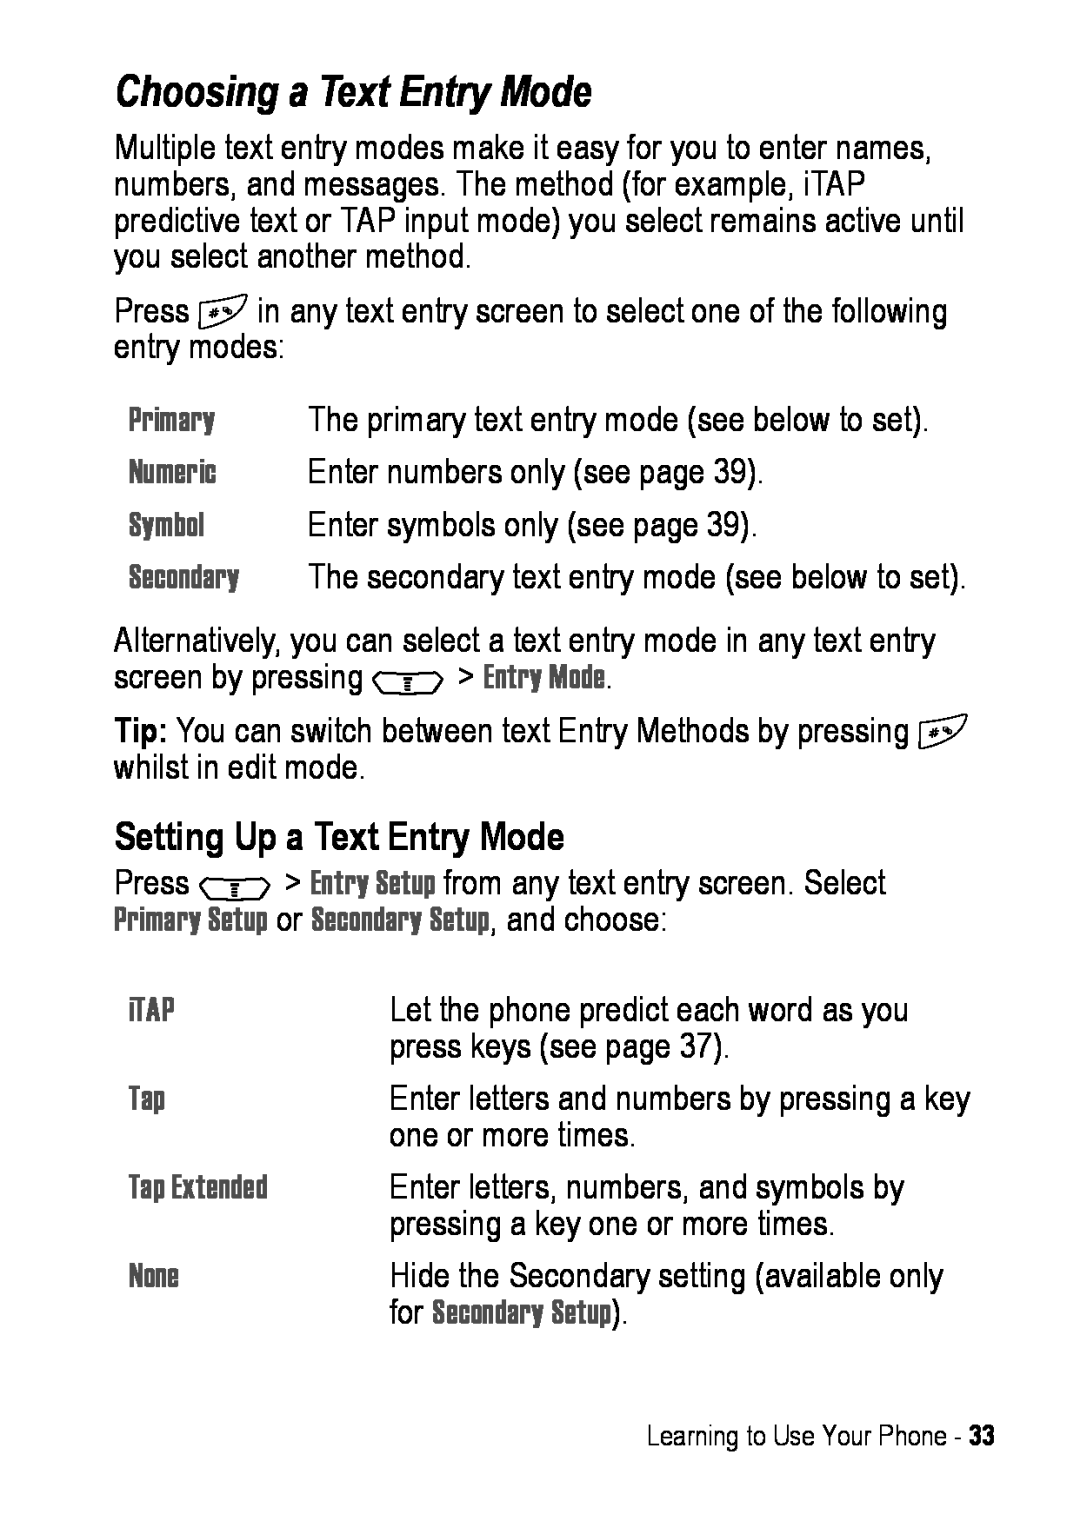 Motorola C390 Choosing a Text Entry Mode, Setting Up a Text Entry Mode, iTAP, Tap Extended, None, for Secondary Setup 